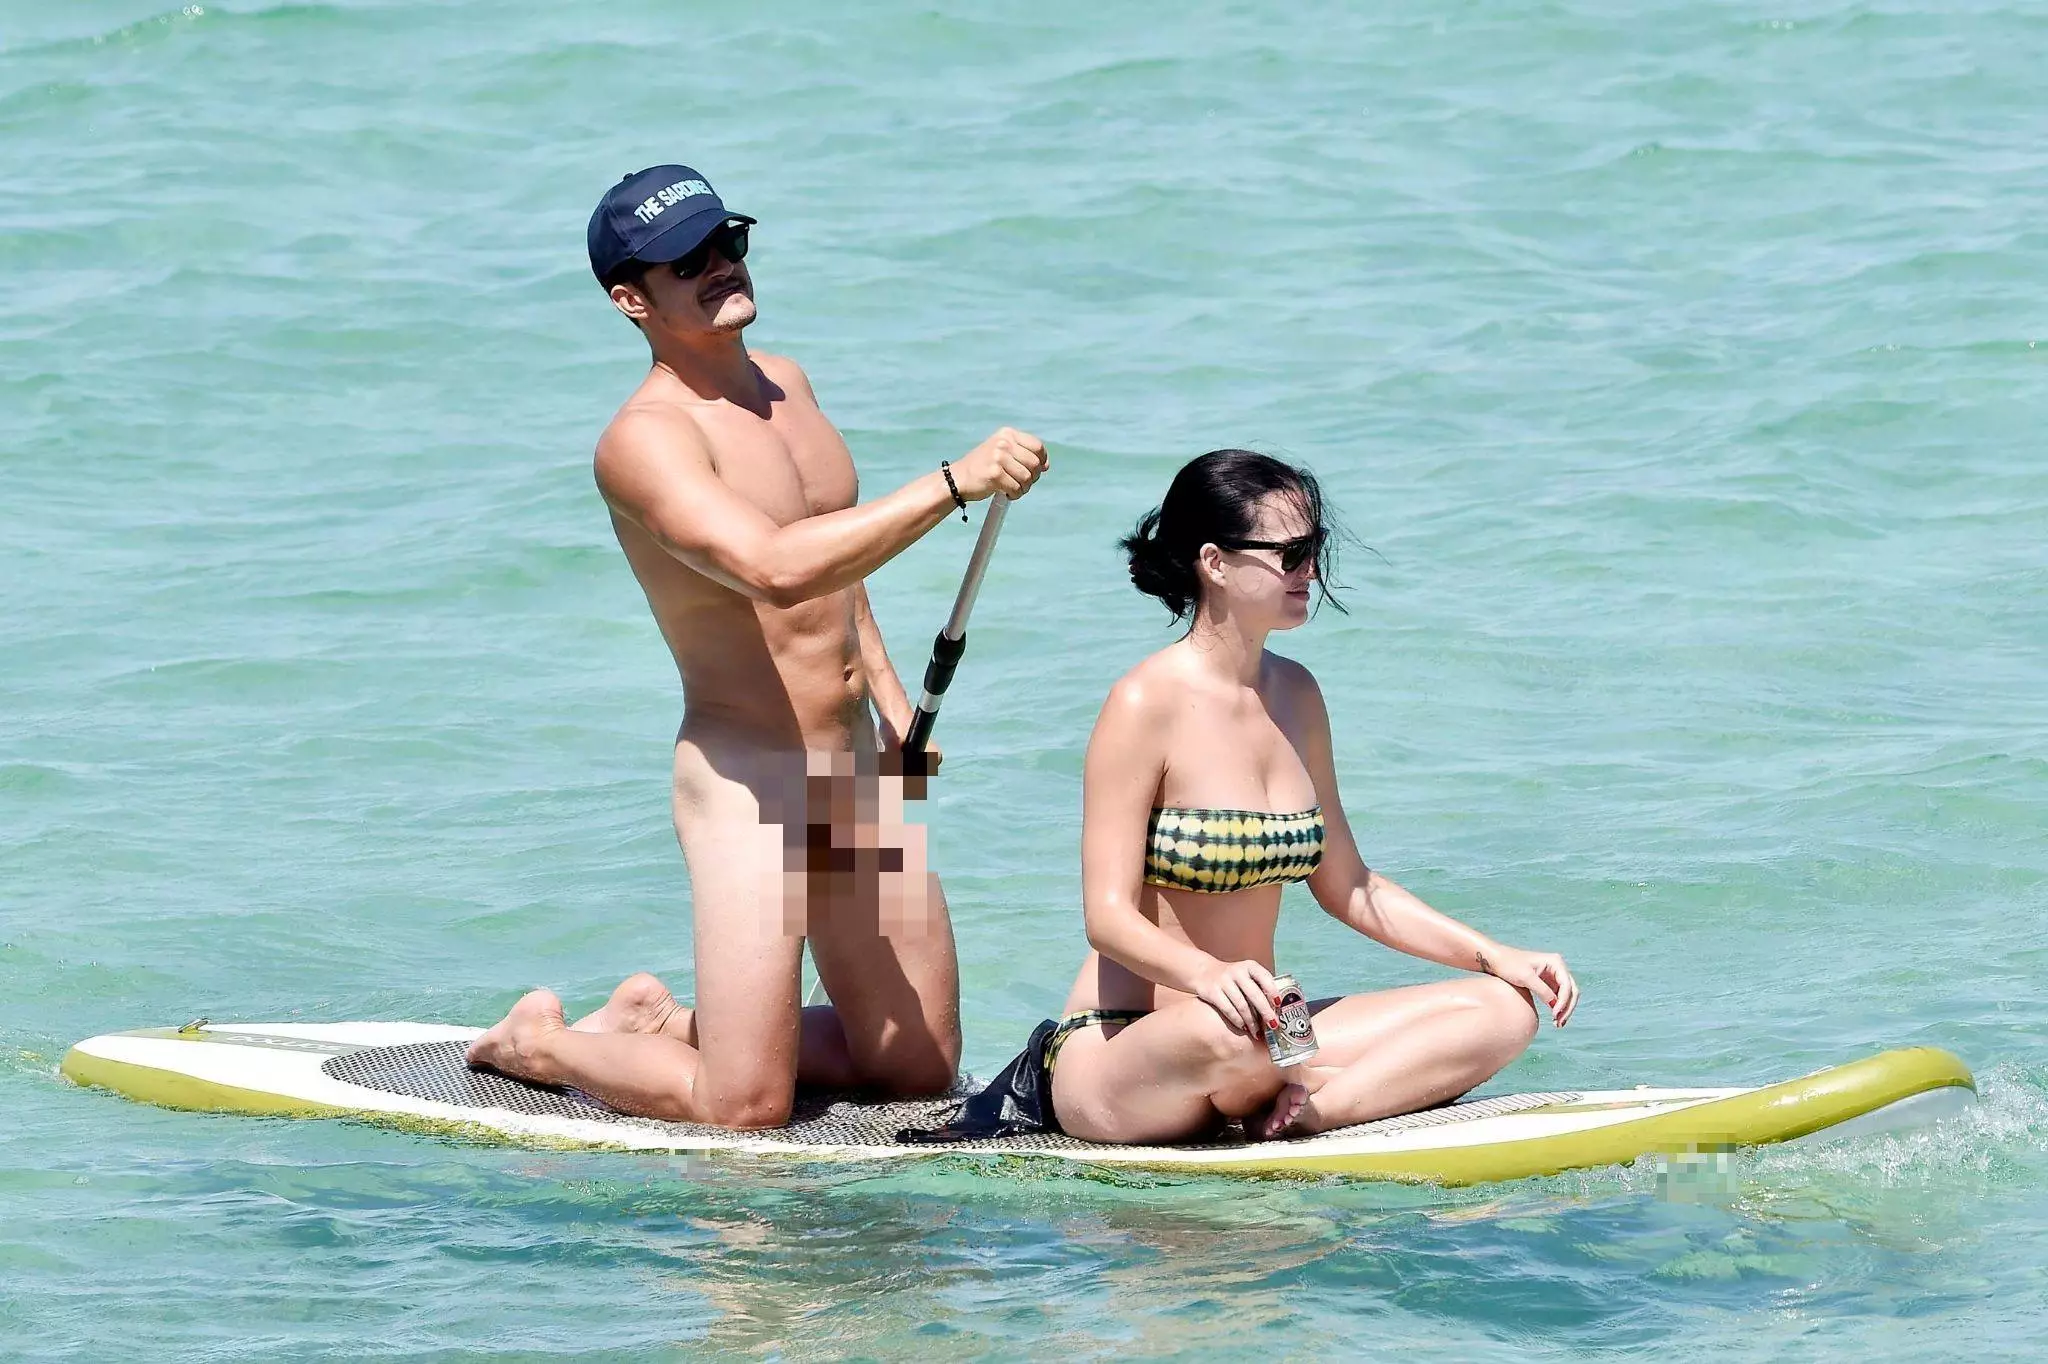 Orlando Bloom was photographed naked on the paddleboard with Katy Perry.